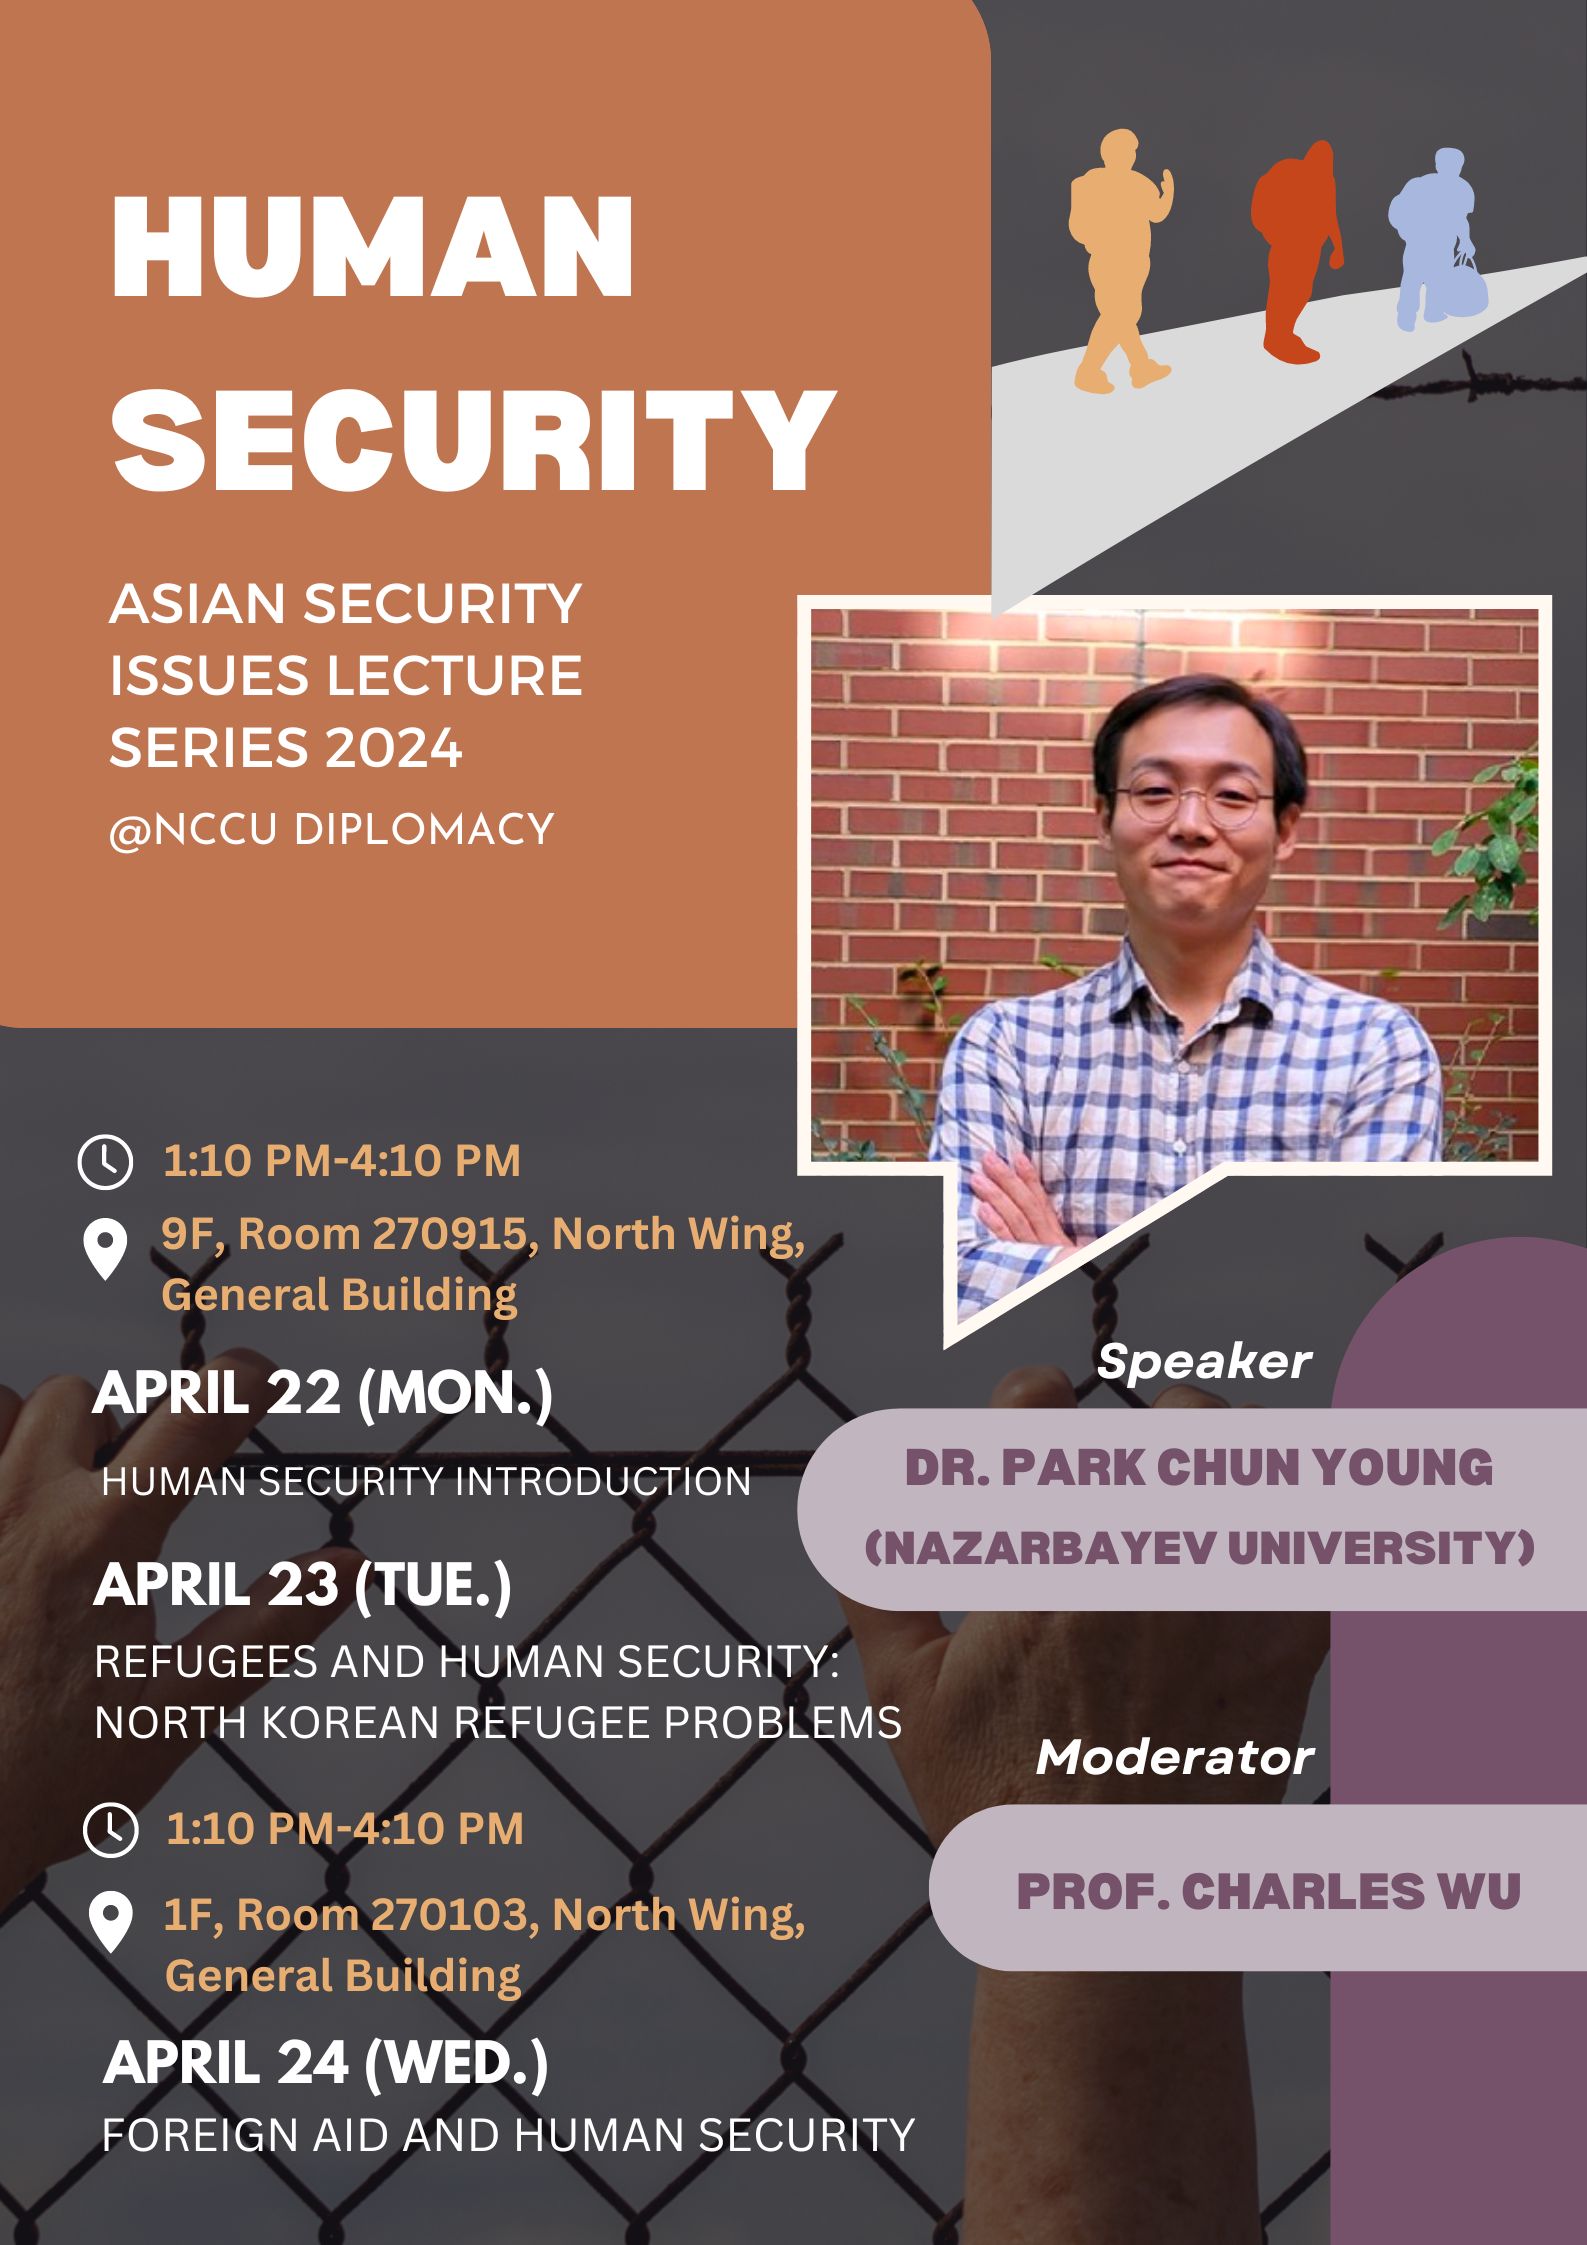 [ASIAN SECURITY ISSUES LECTURE SERIES 2024] HUMAN SECURITY (Dr. Park Chun Young)